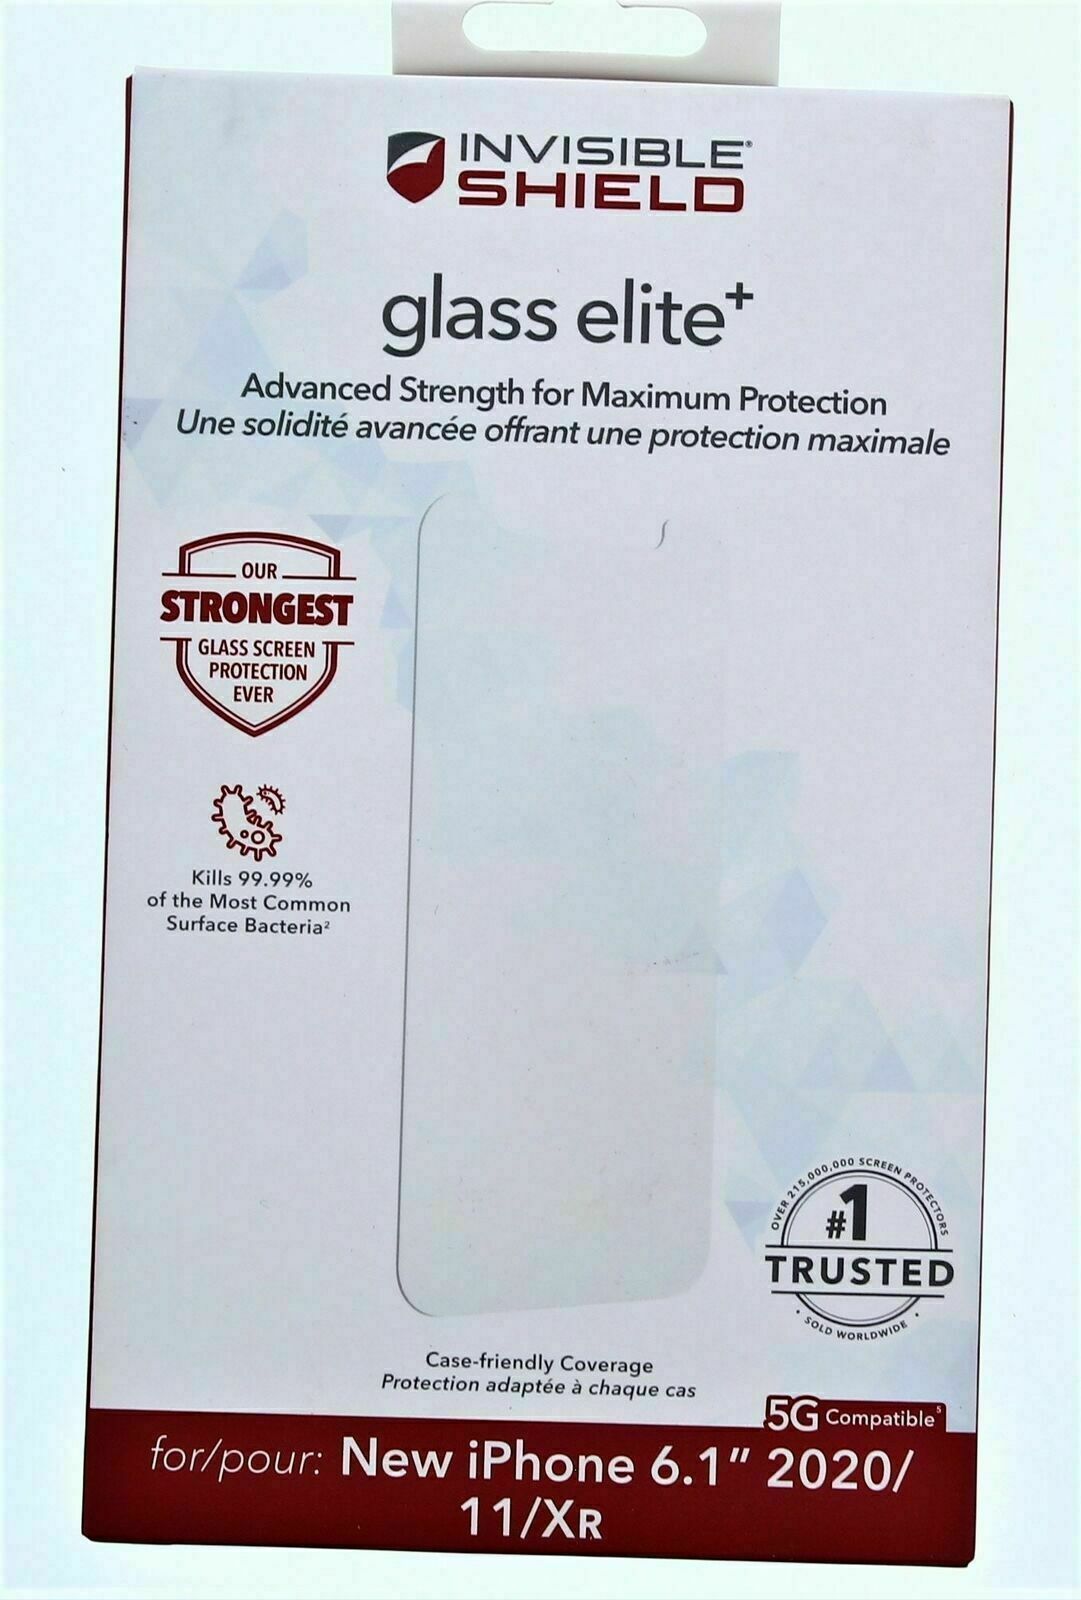 Primary image for INVISIBLE SHIELD Glass Elite⁺ Screen Protection for New iPhone 6.1" 2020/11/Xʀ